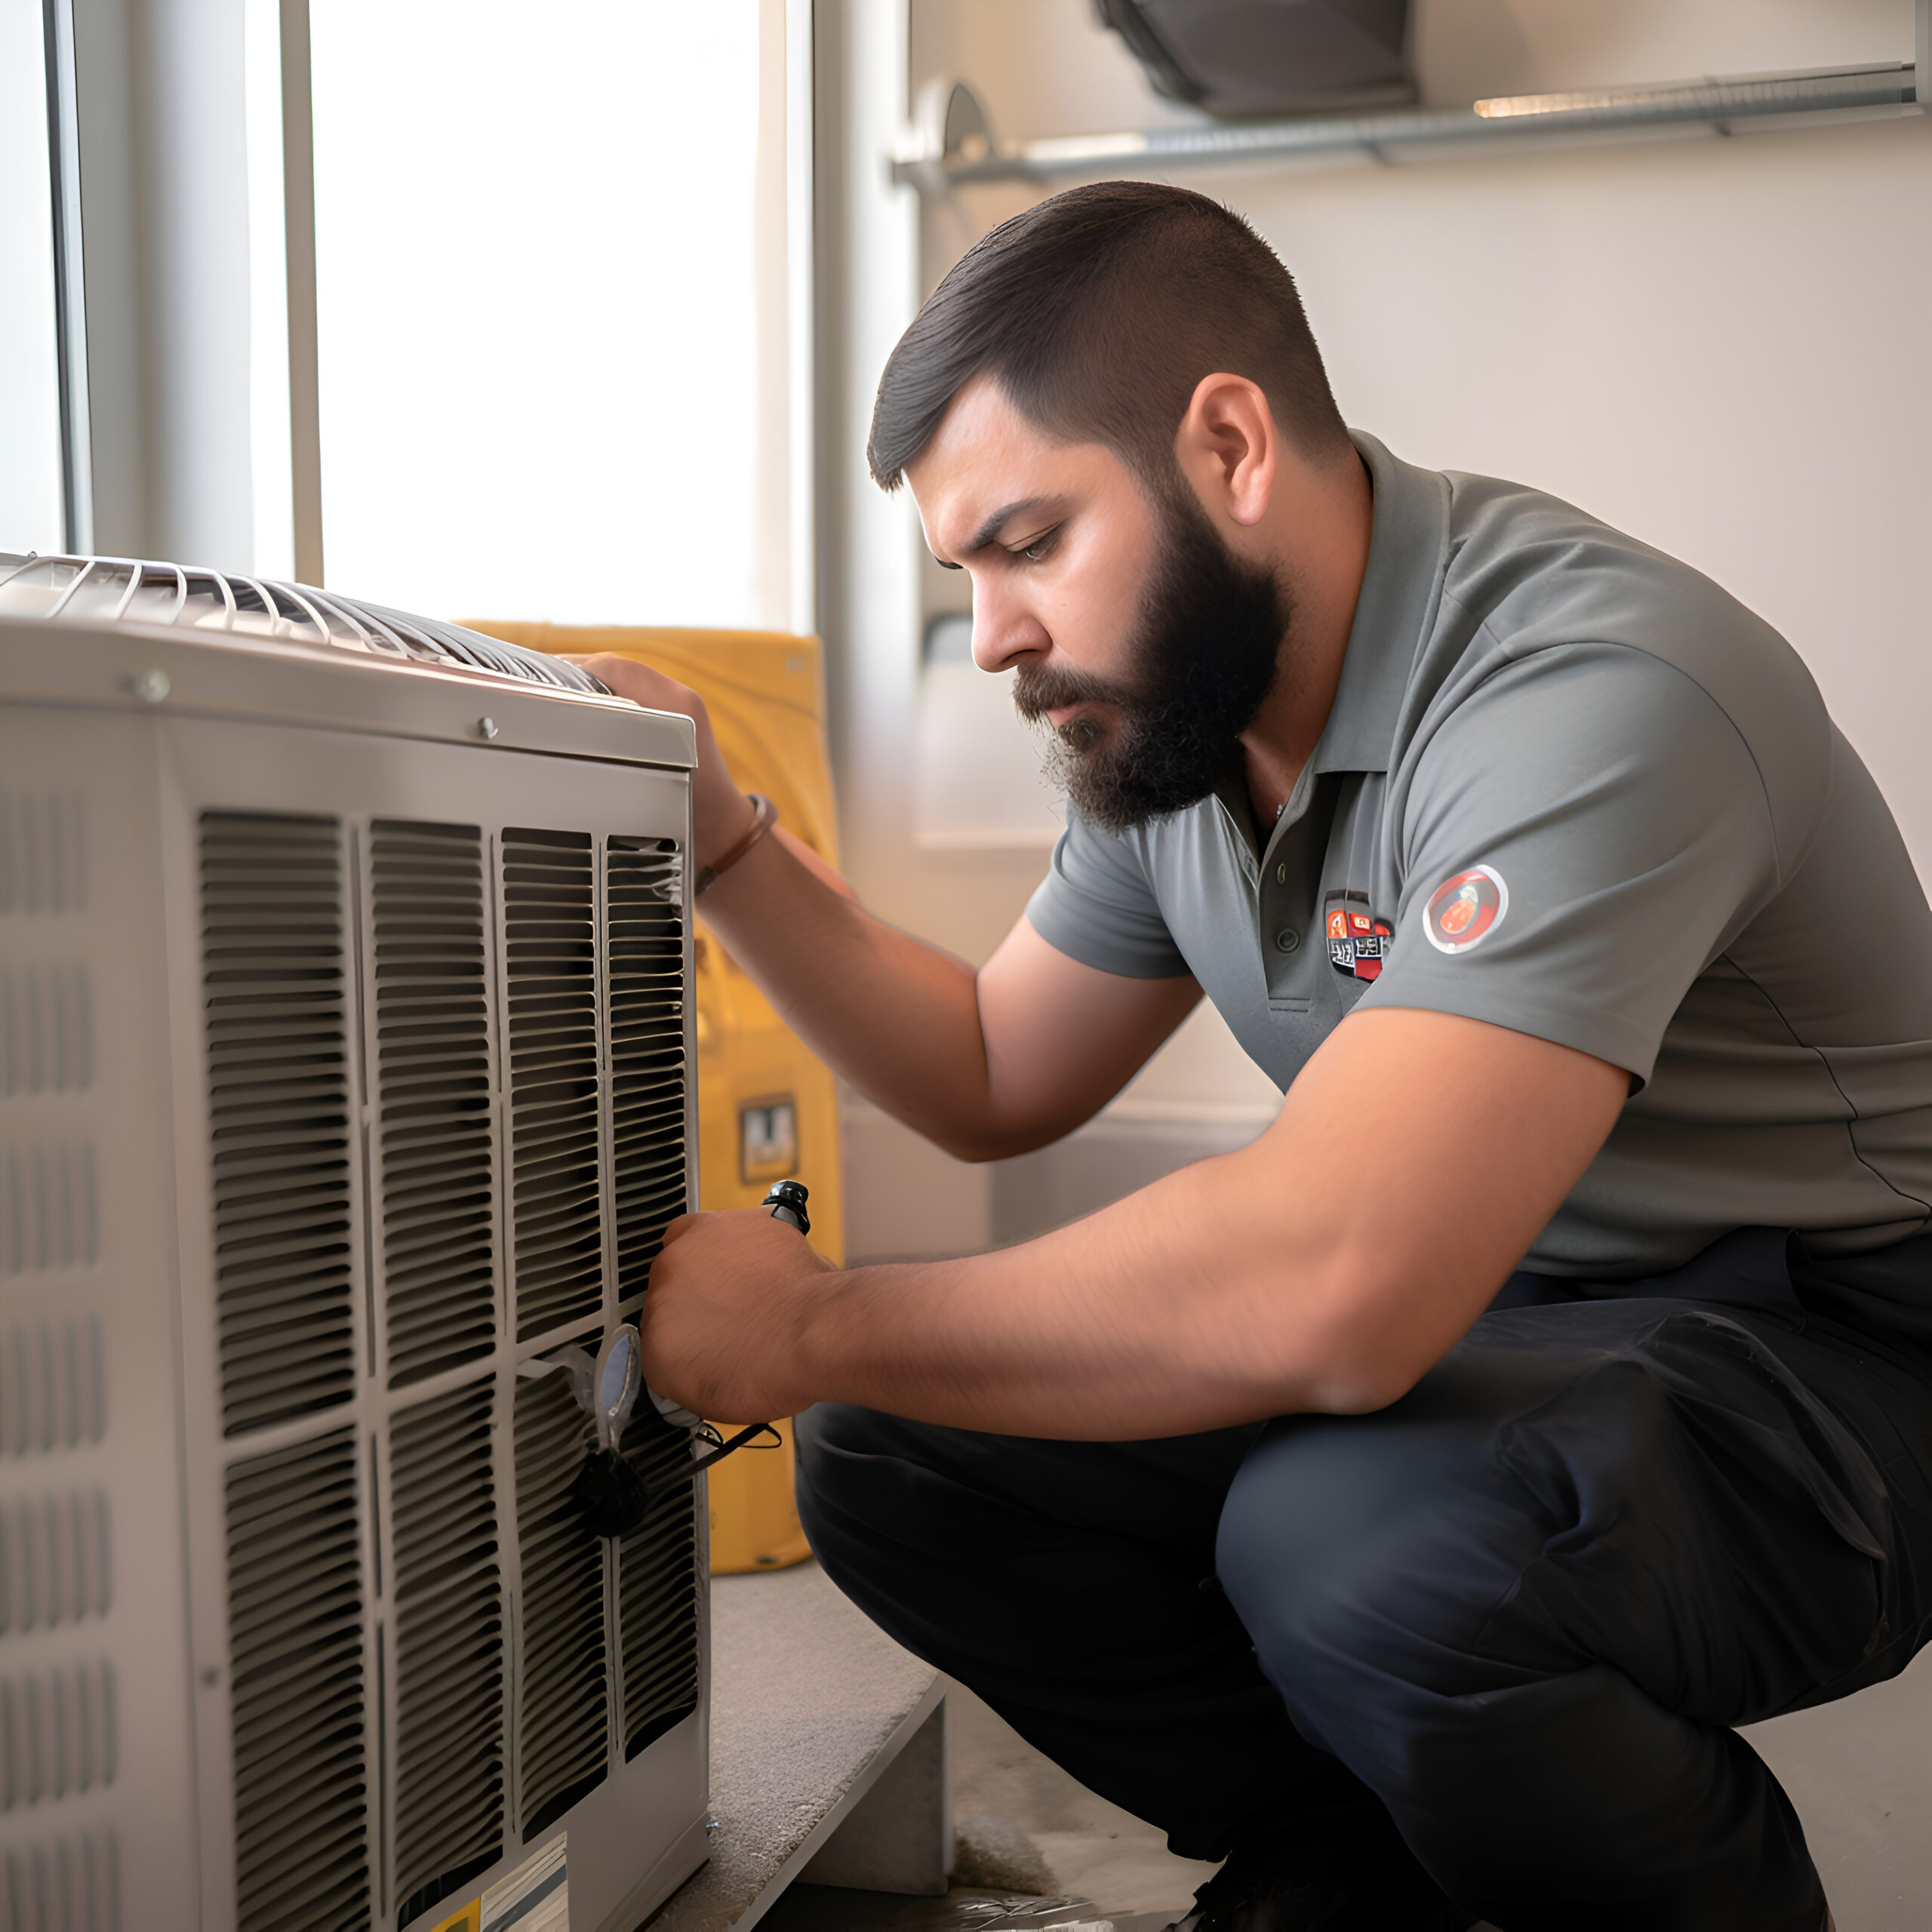 portrait technician repairing air conditioner his office scaled